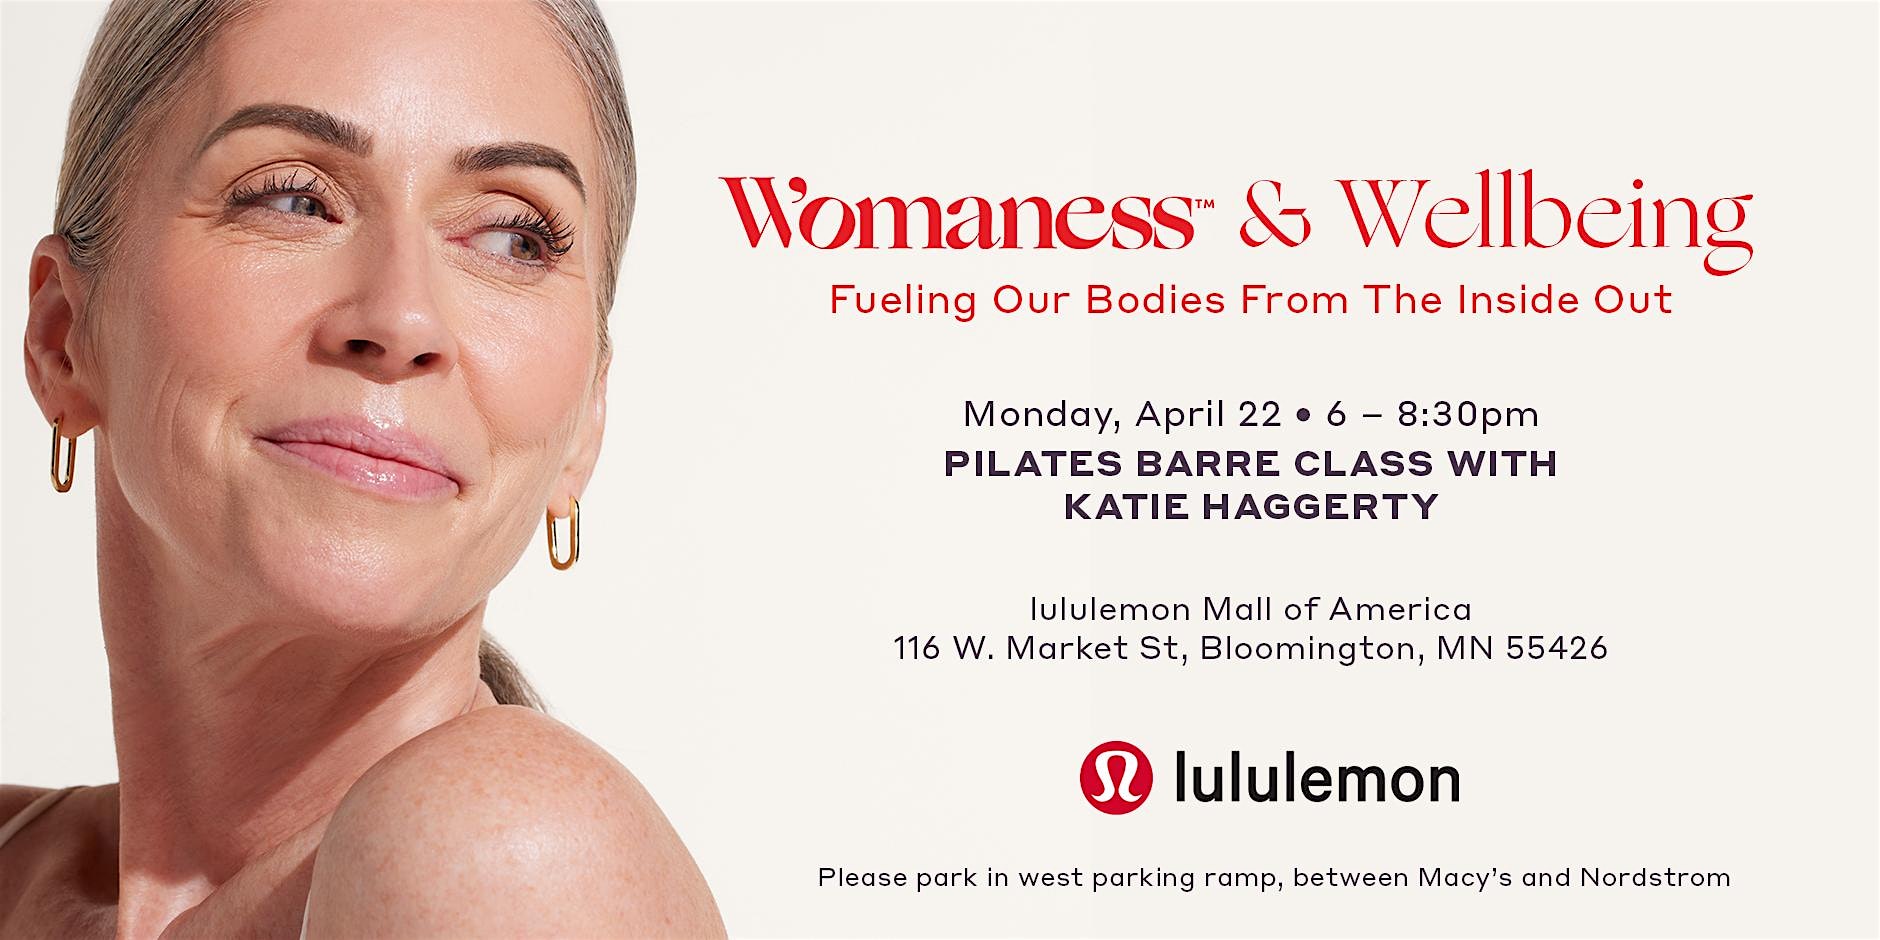 Womaness & Wellness: Fueling Our Bodies From the Inside Out